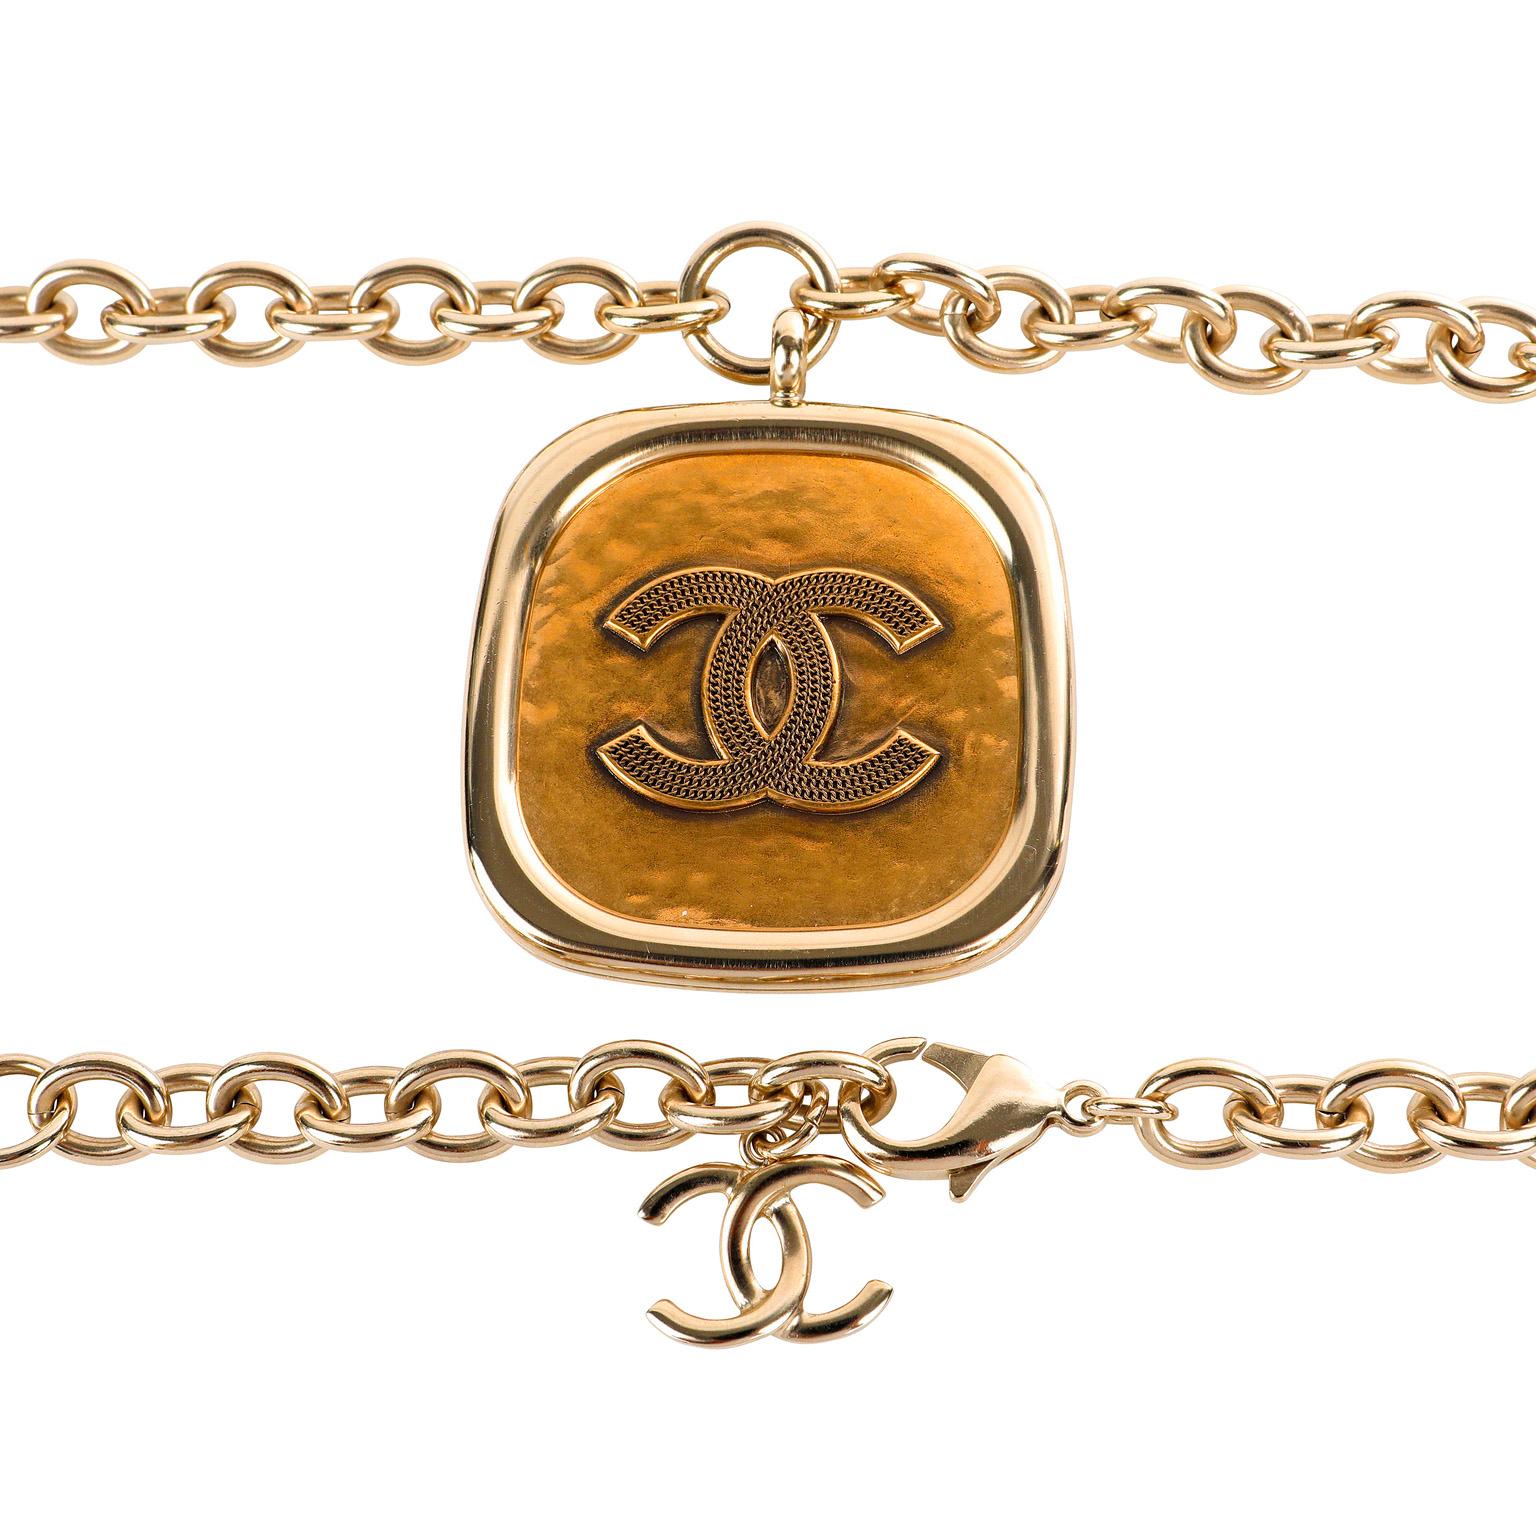 This authentic Chanel Large Gold Medallion Necklace is in mint condition.  A substantial gold tone rectangular medallion is etched with woman’s profile.  Long gold linked chain.  Box or pouch included.

PBF 12651